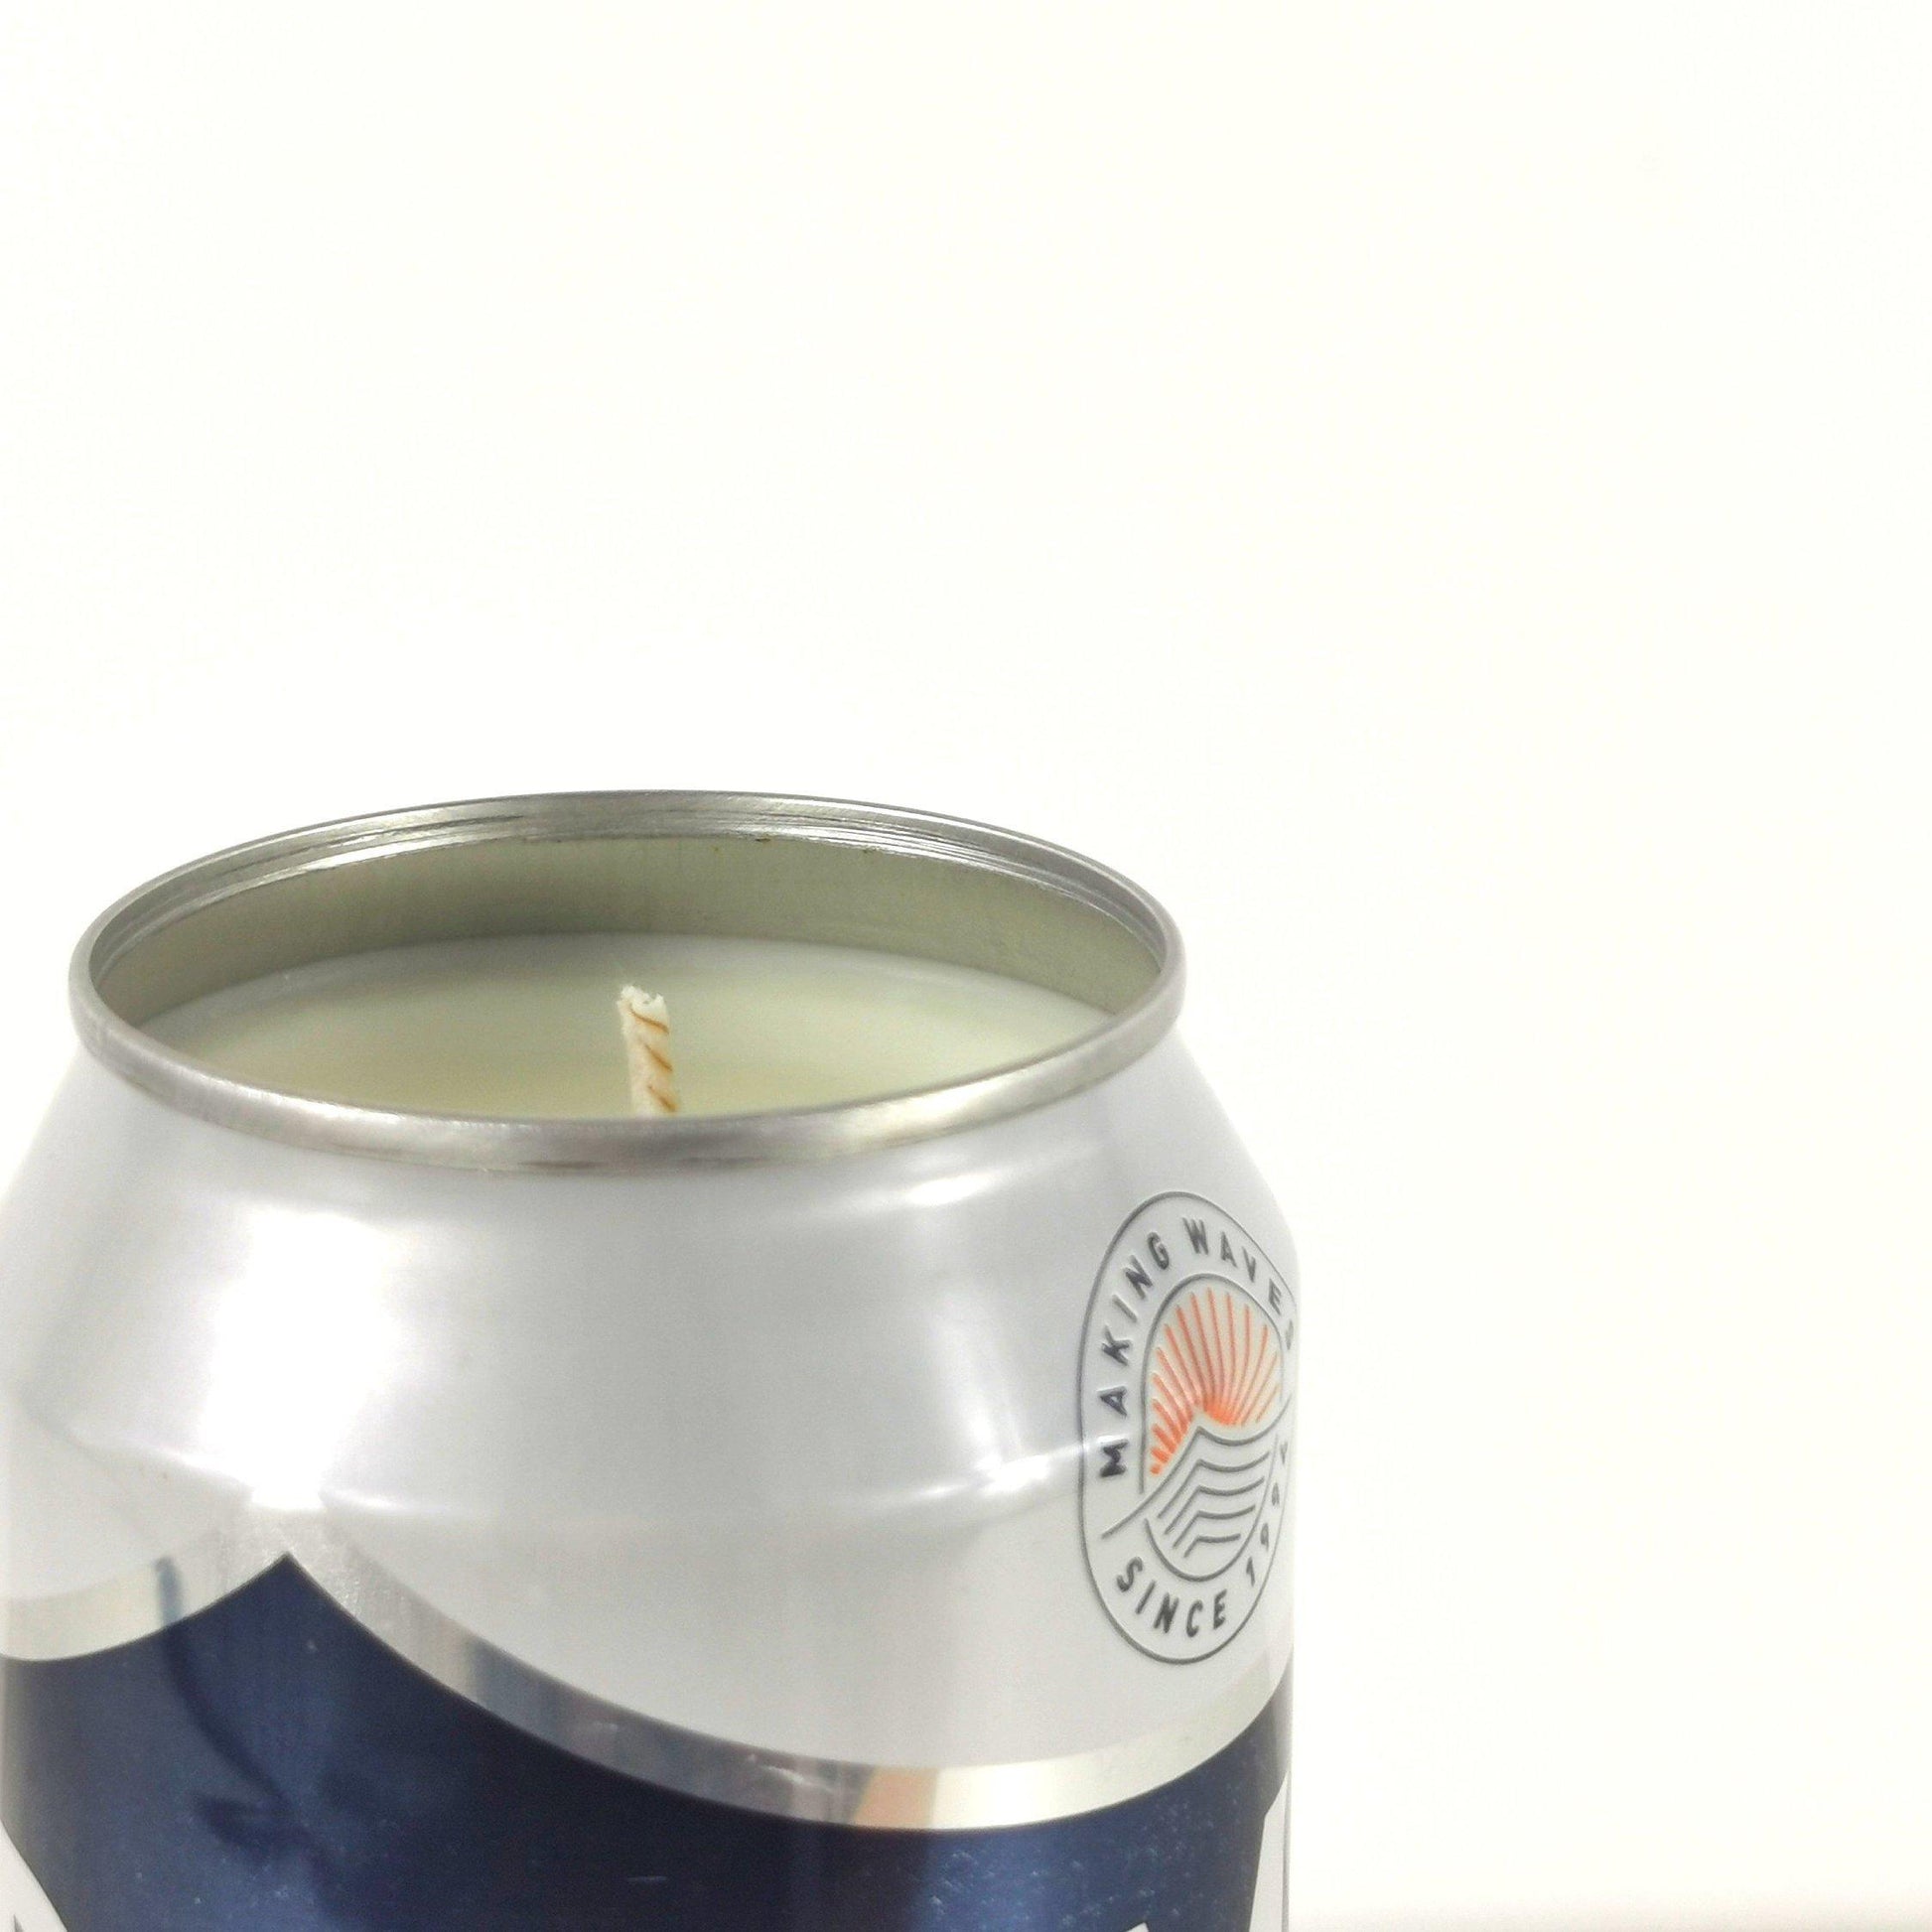 Doom Bar Ale Craft Beer Can Candle Beer Can Candles Adhock Homeware